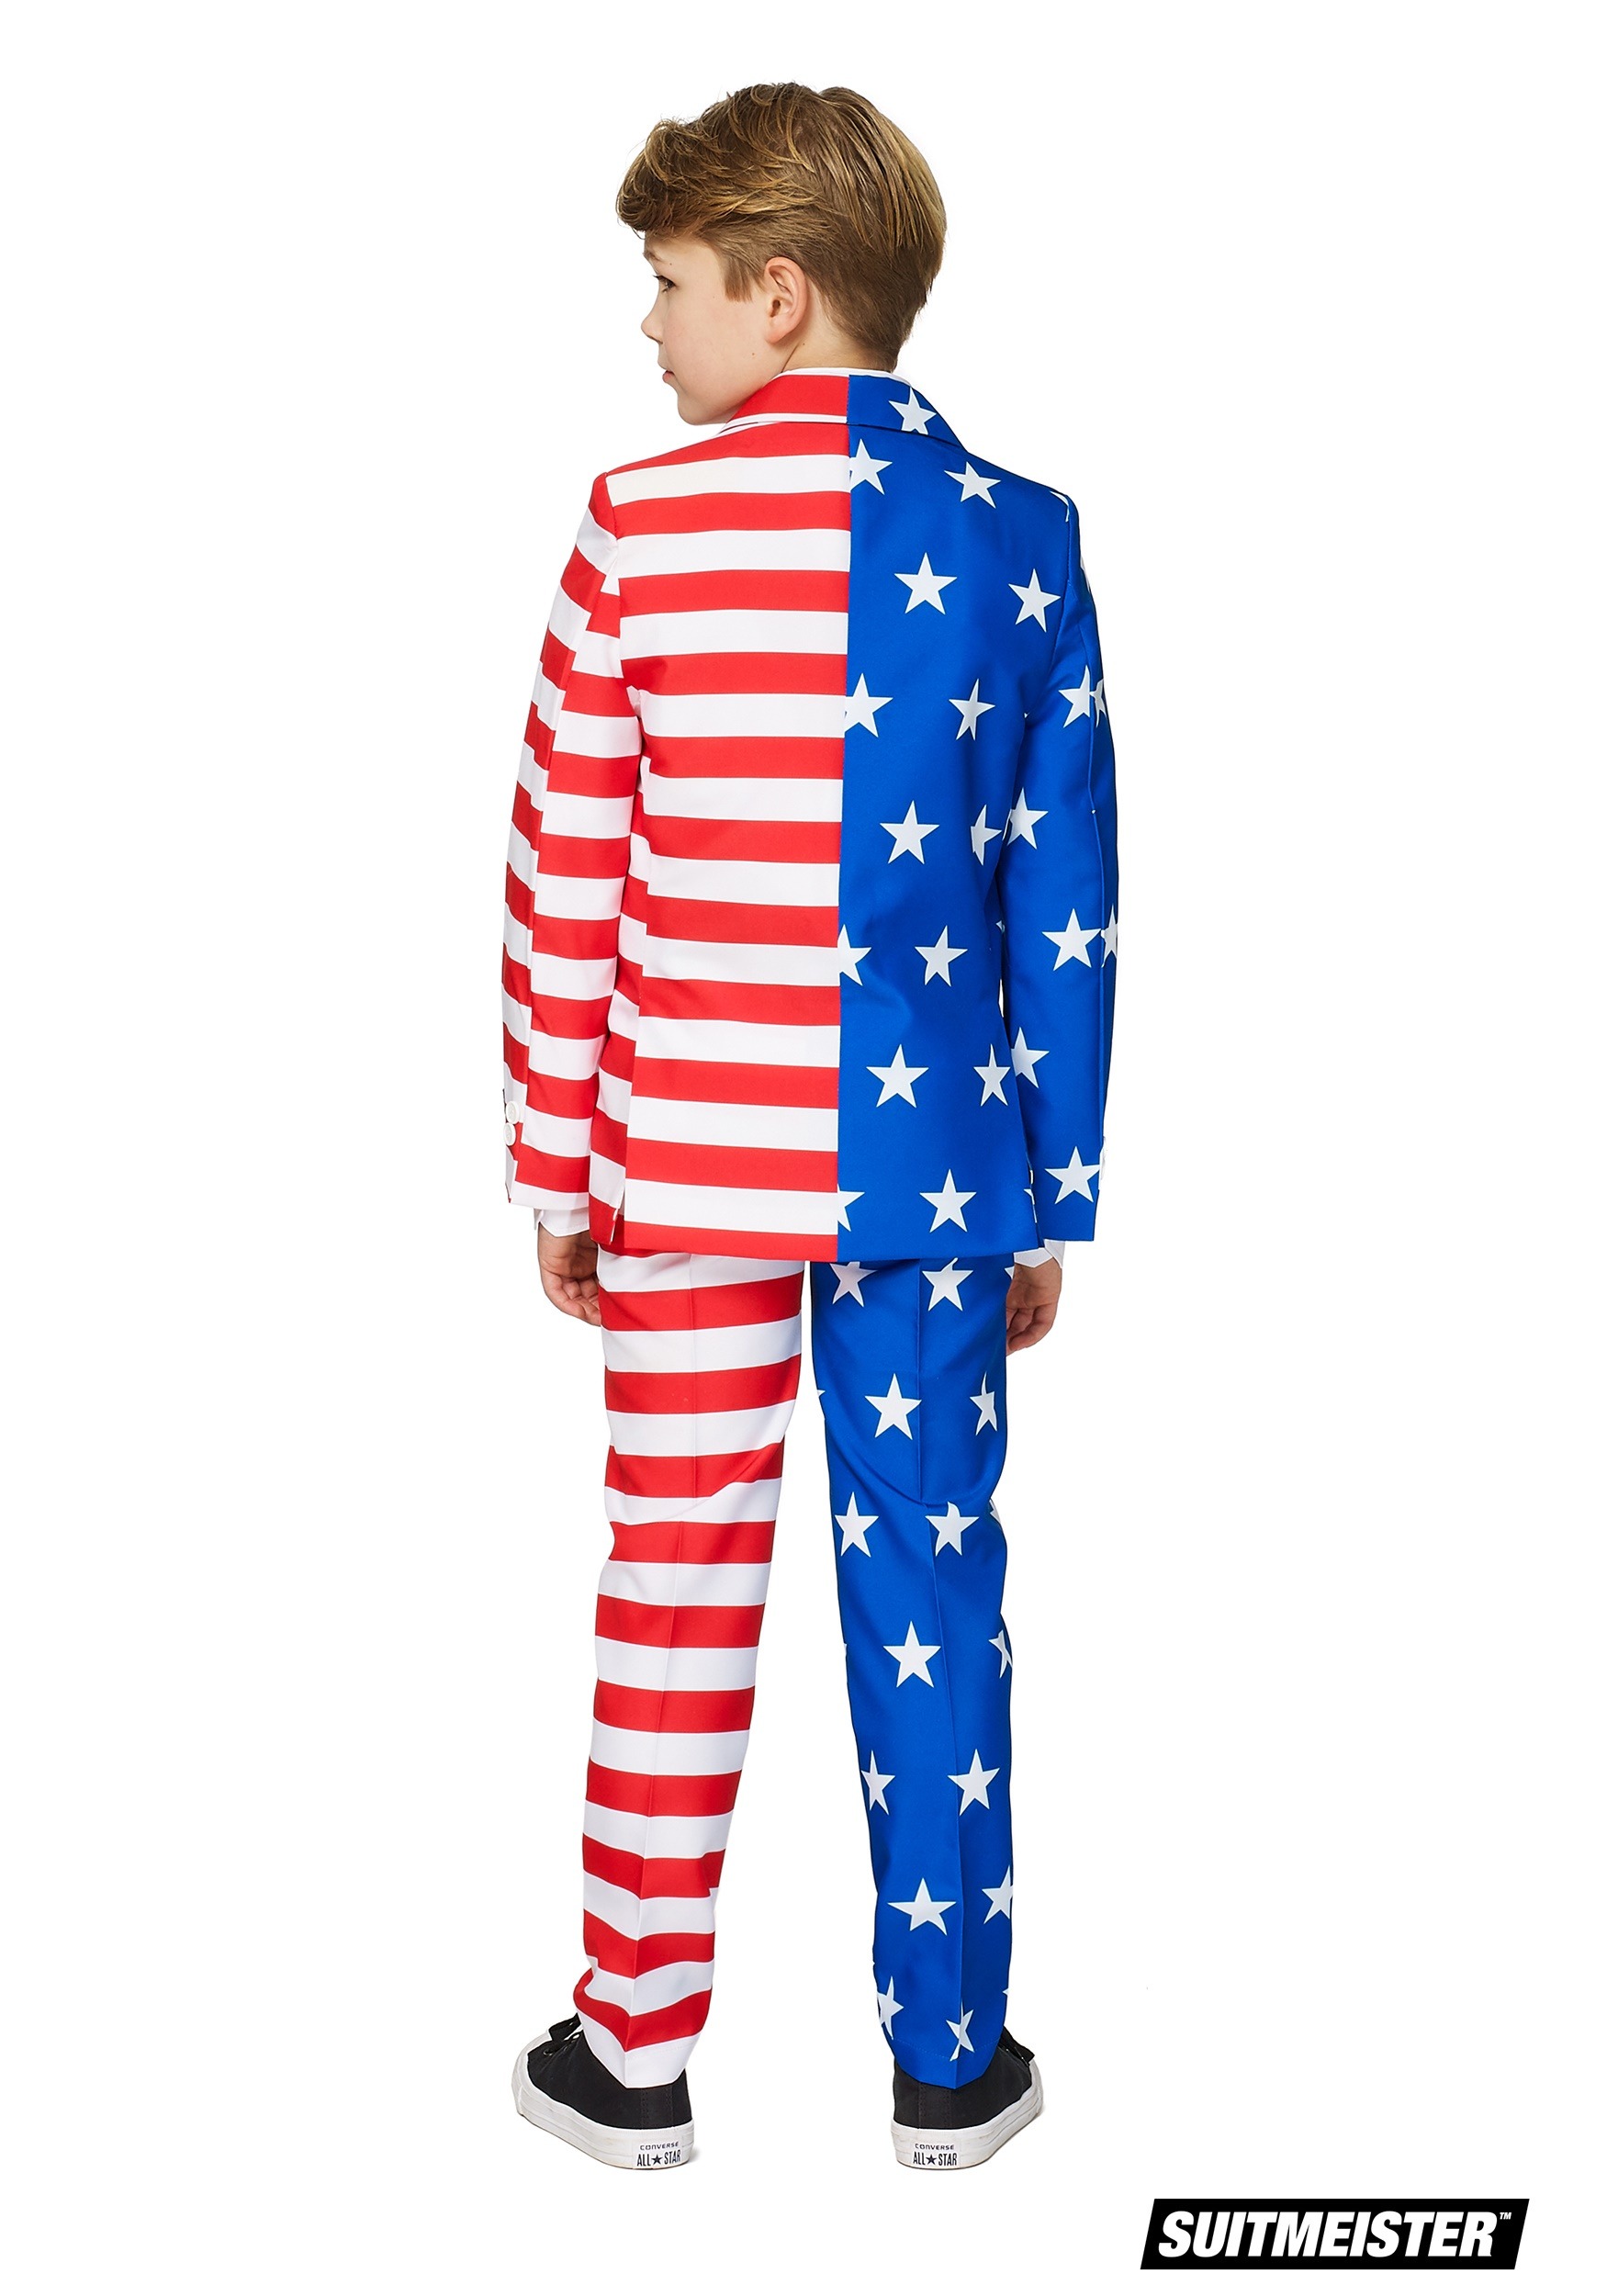 USA Flag Suitmeister Suit Costume For Boys